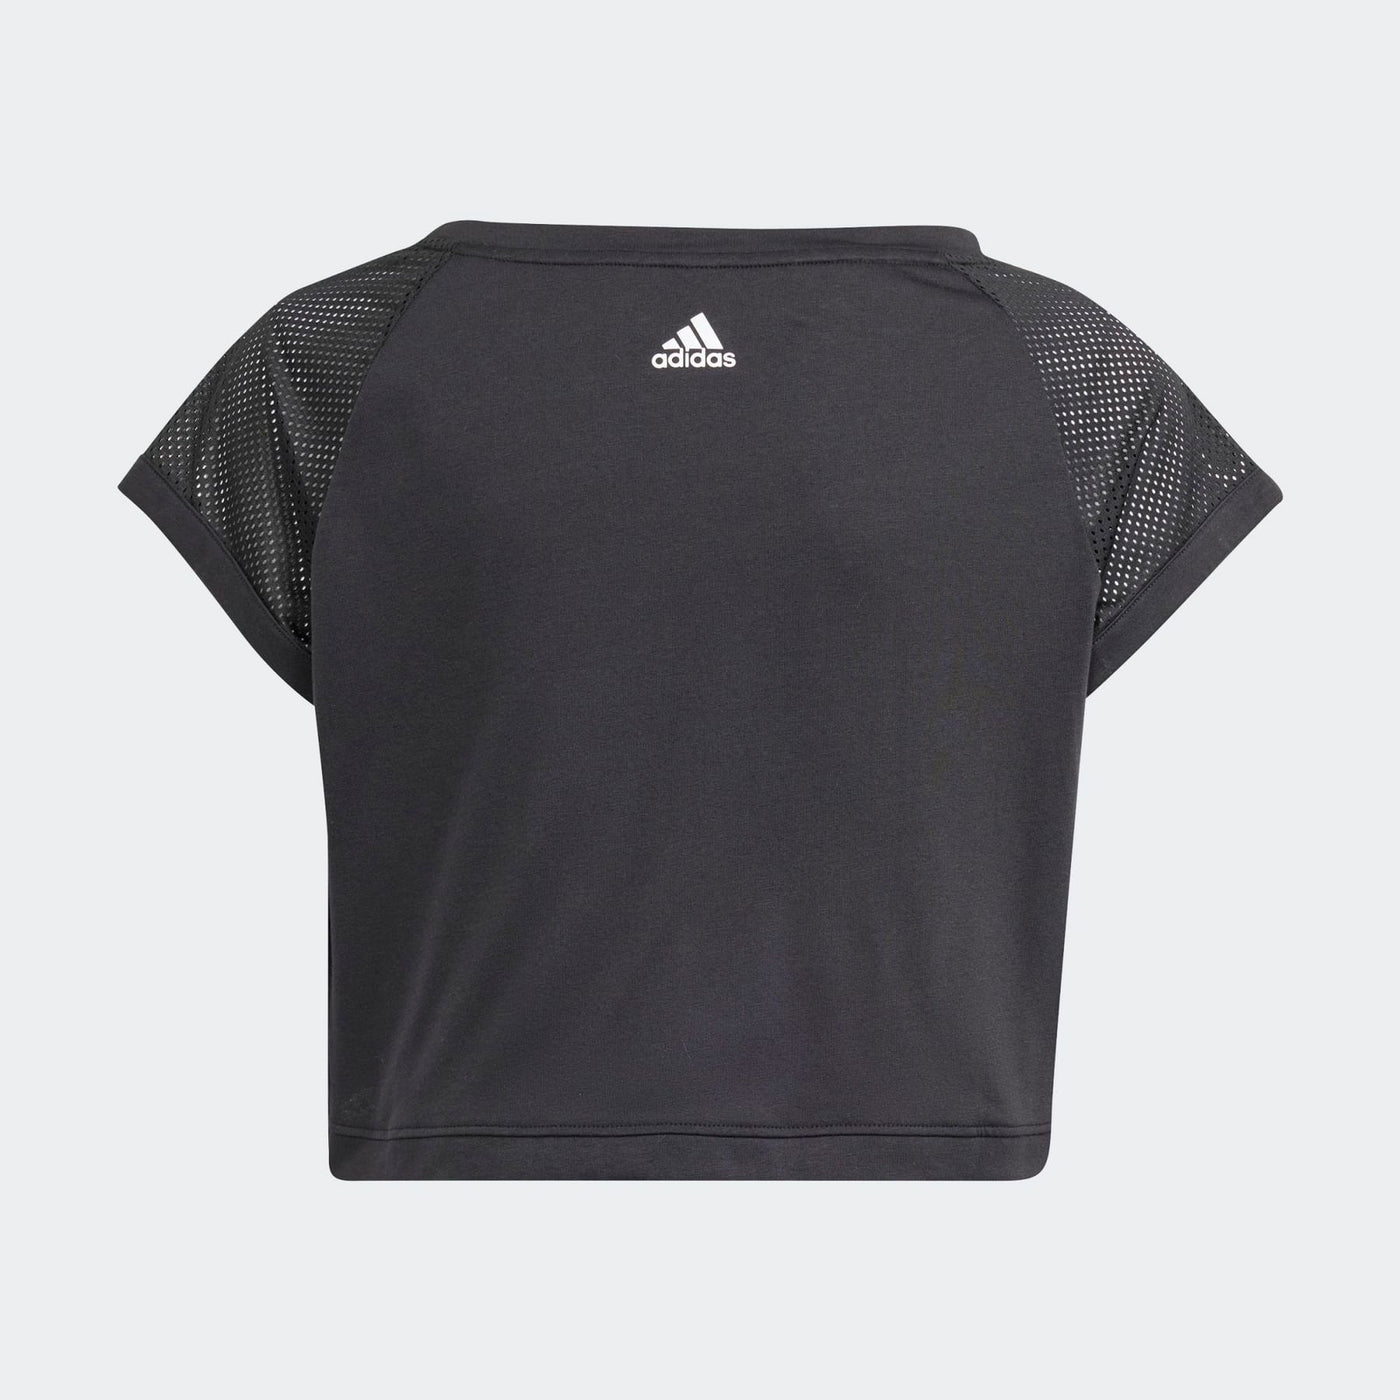 IS3776 - T-Shirt - Adidas